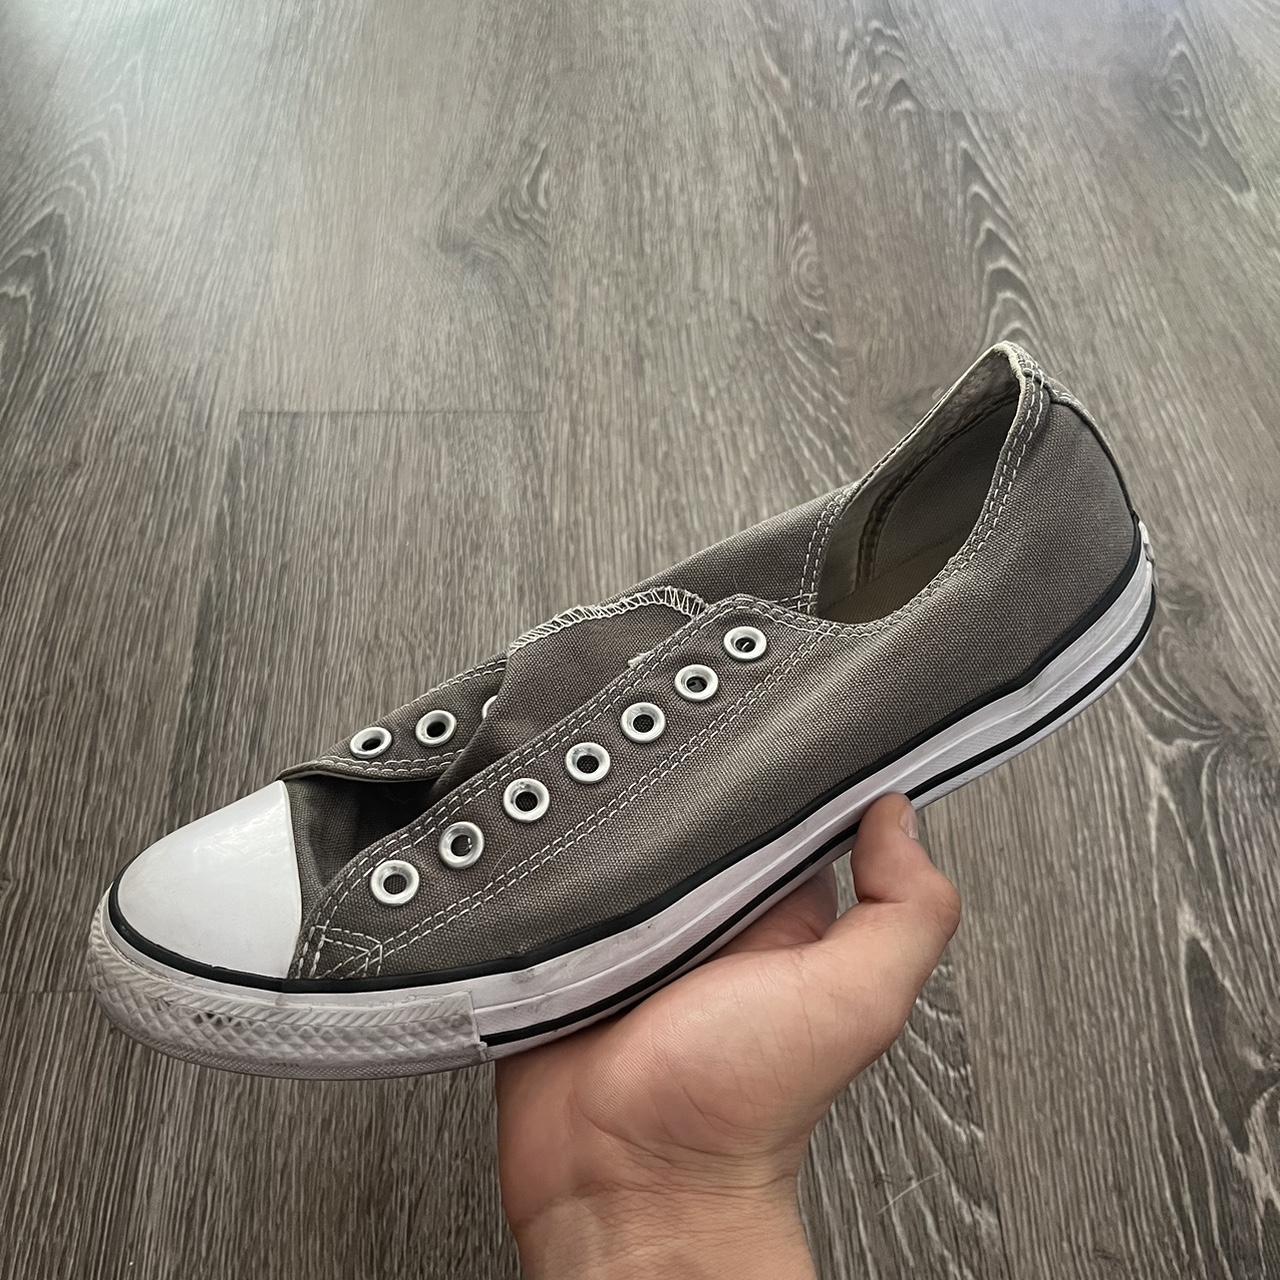 Converse All Star shoes size 10 no laces slip on | eBay